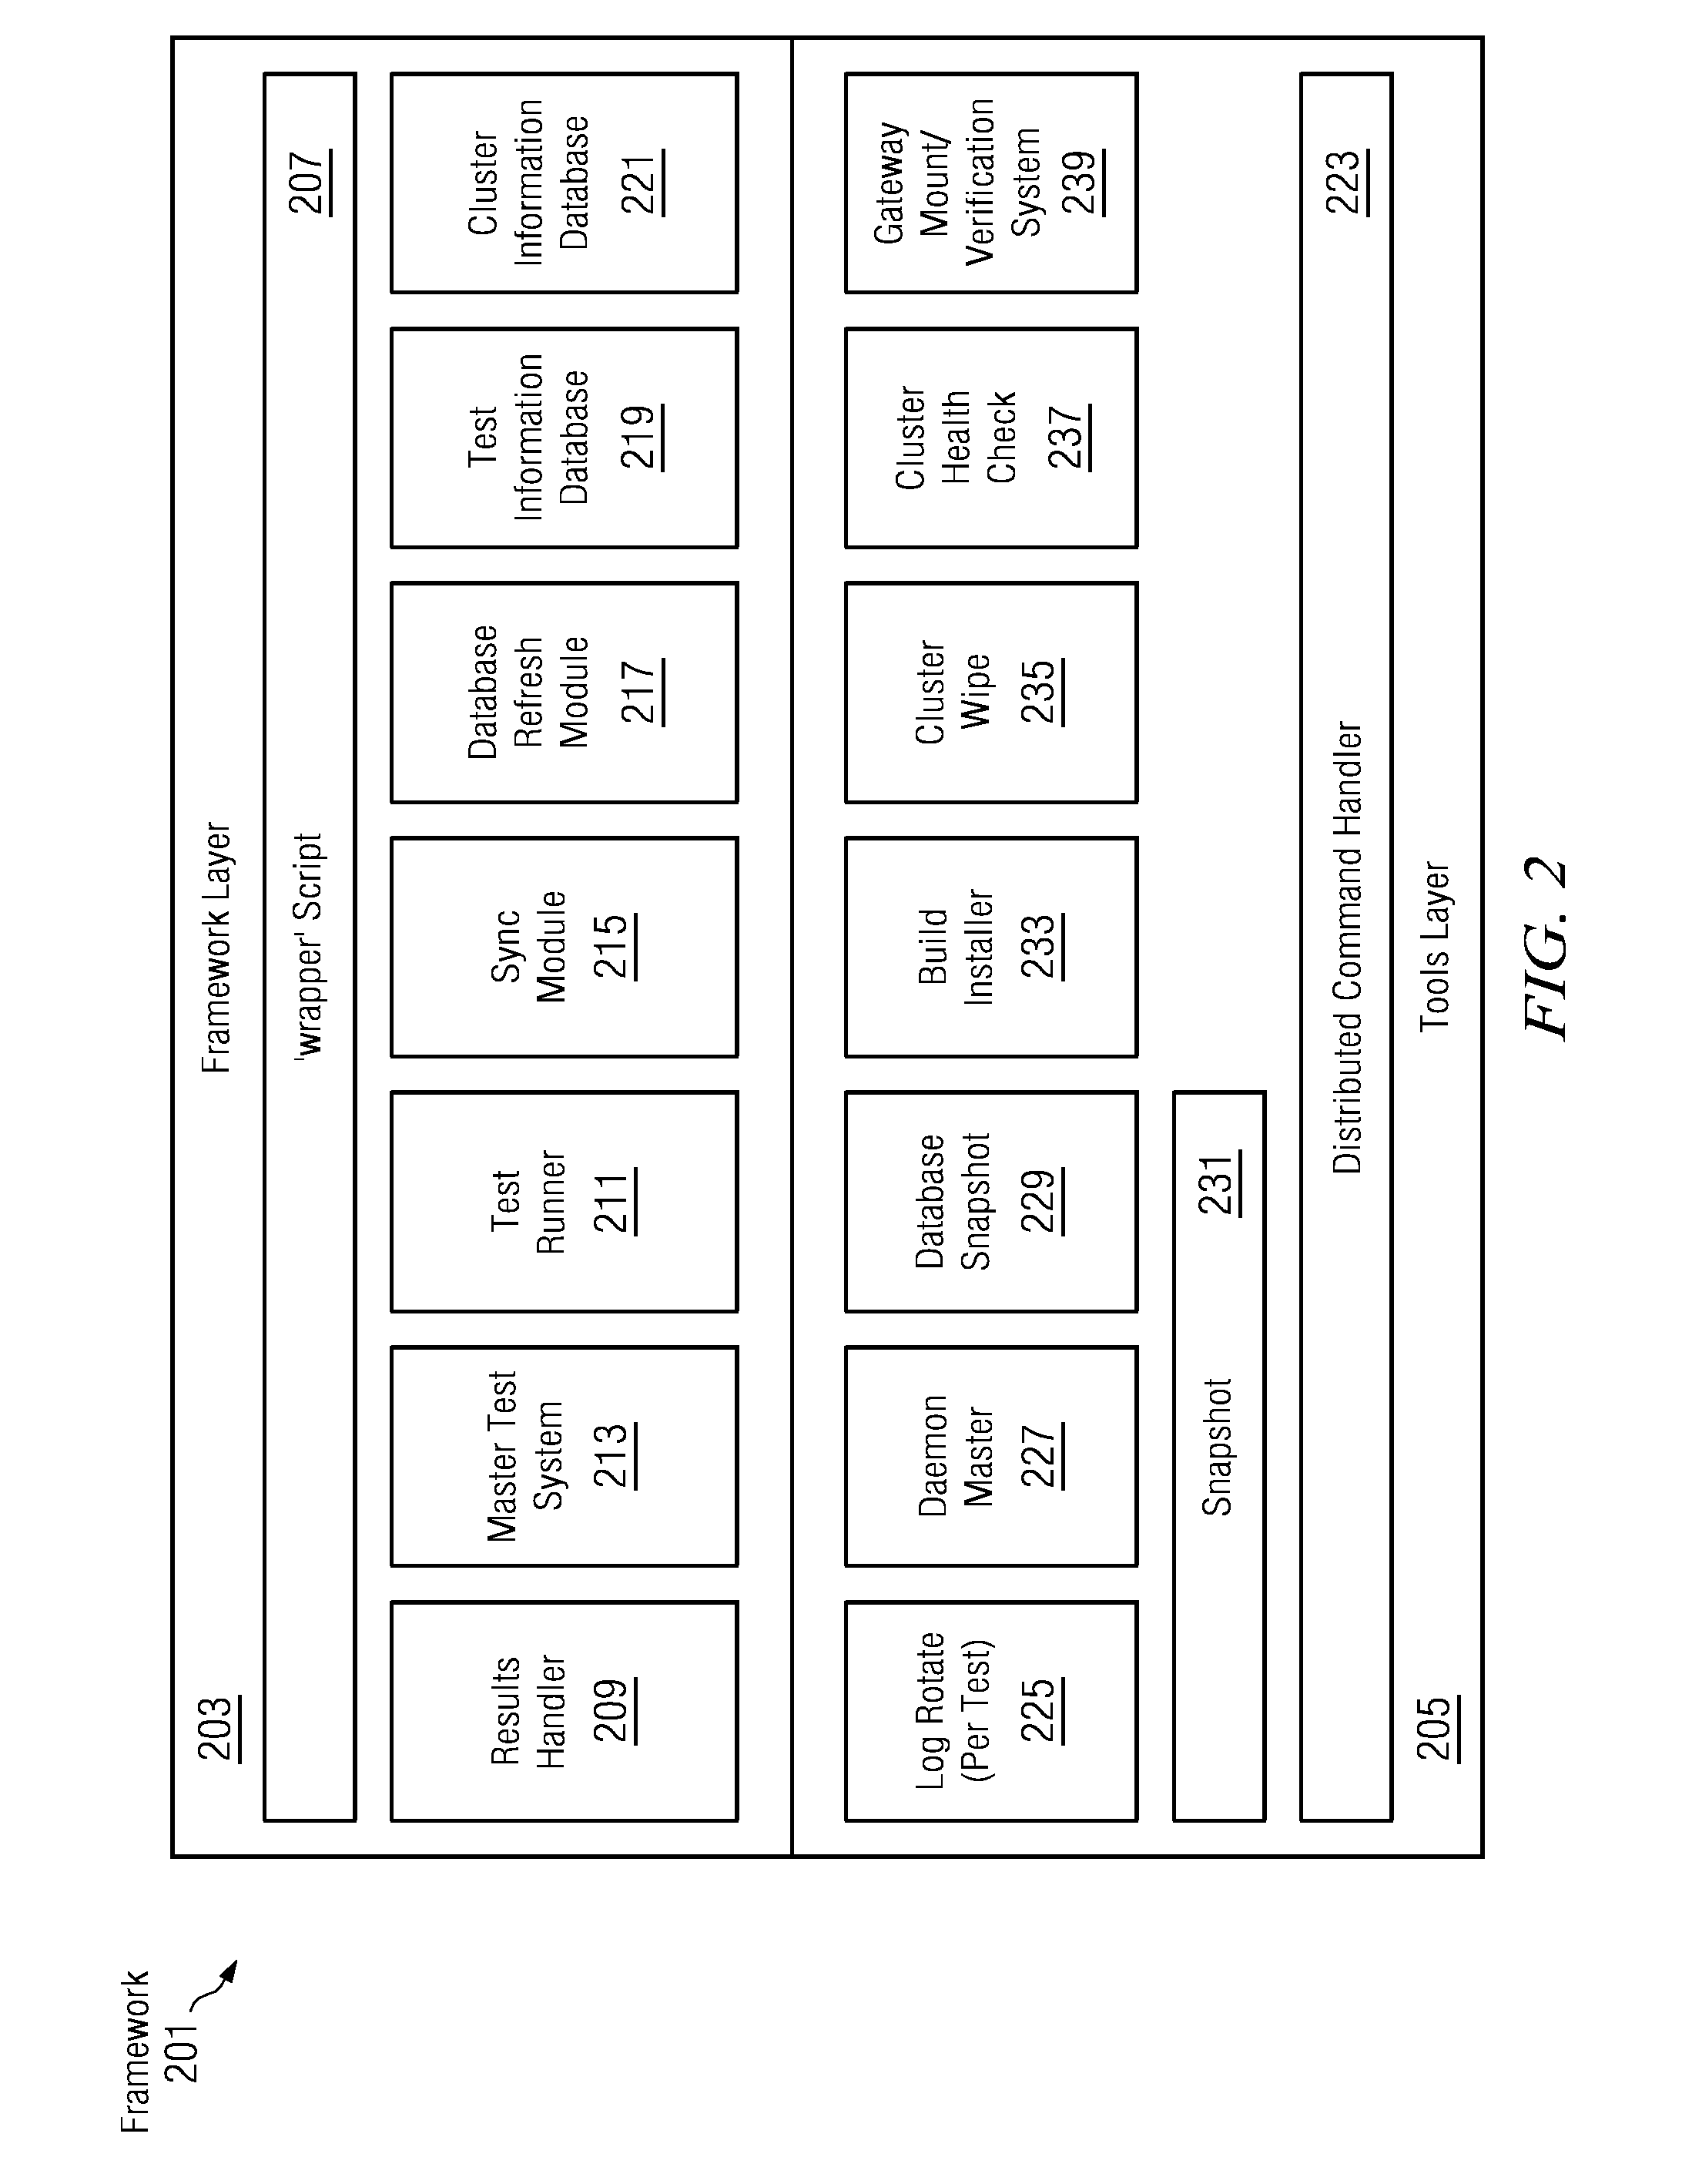 Method and system for feature automation